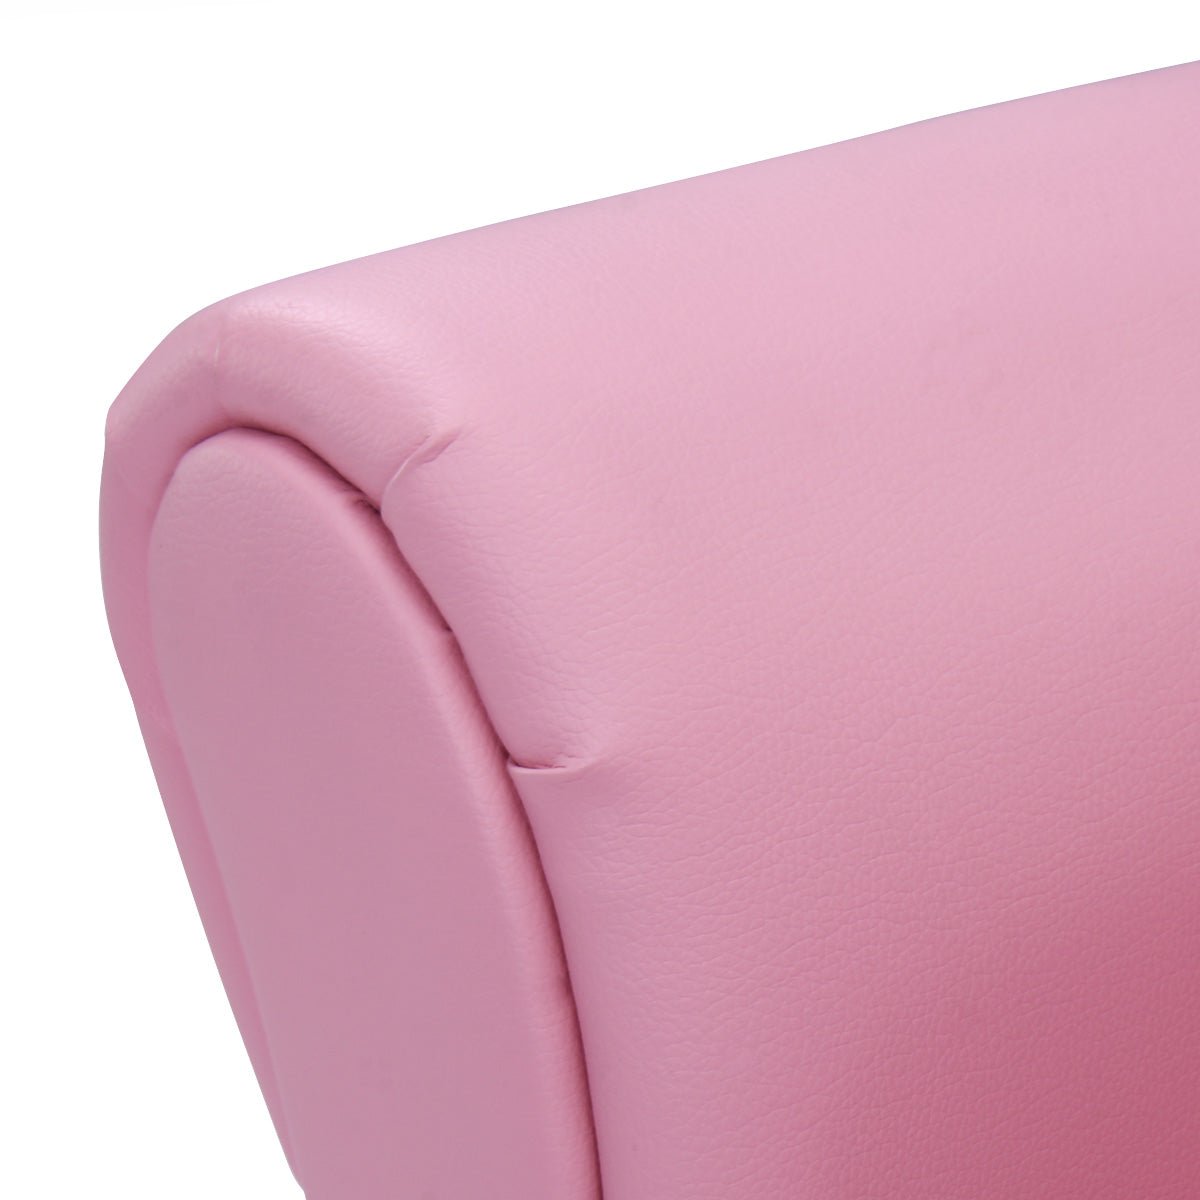 Children's Armrest Sofa Chair: PVC Leather, Soft Seat for Kids